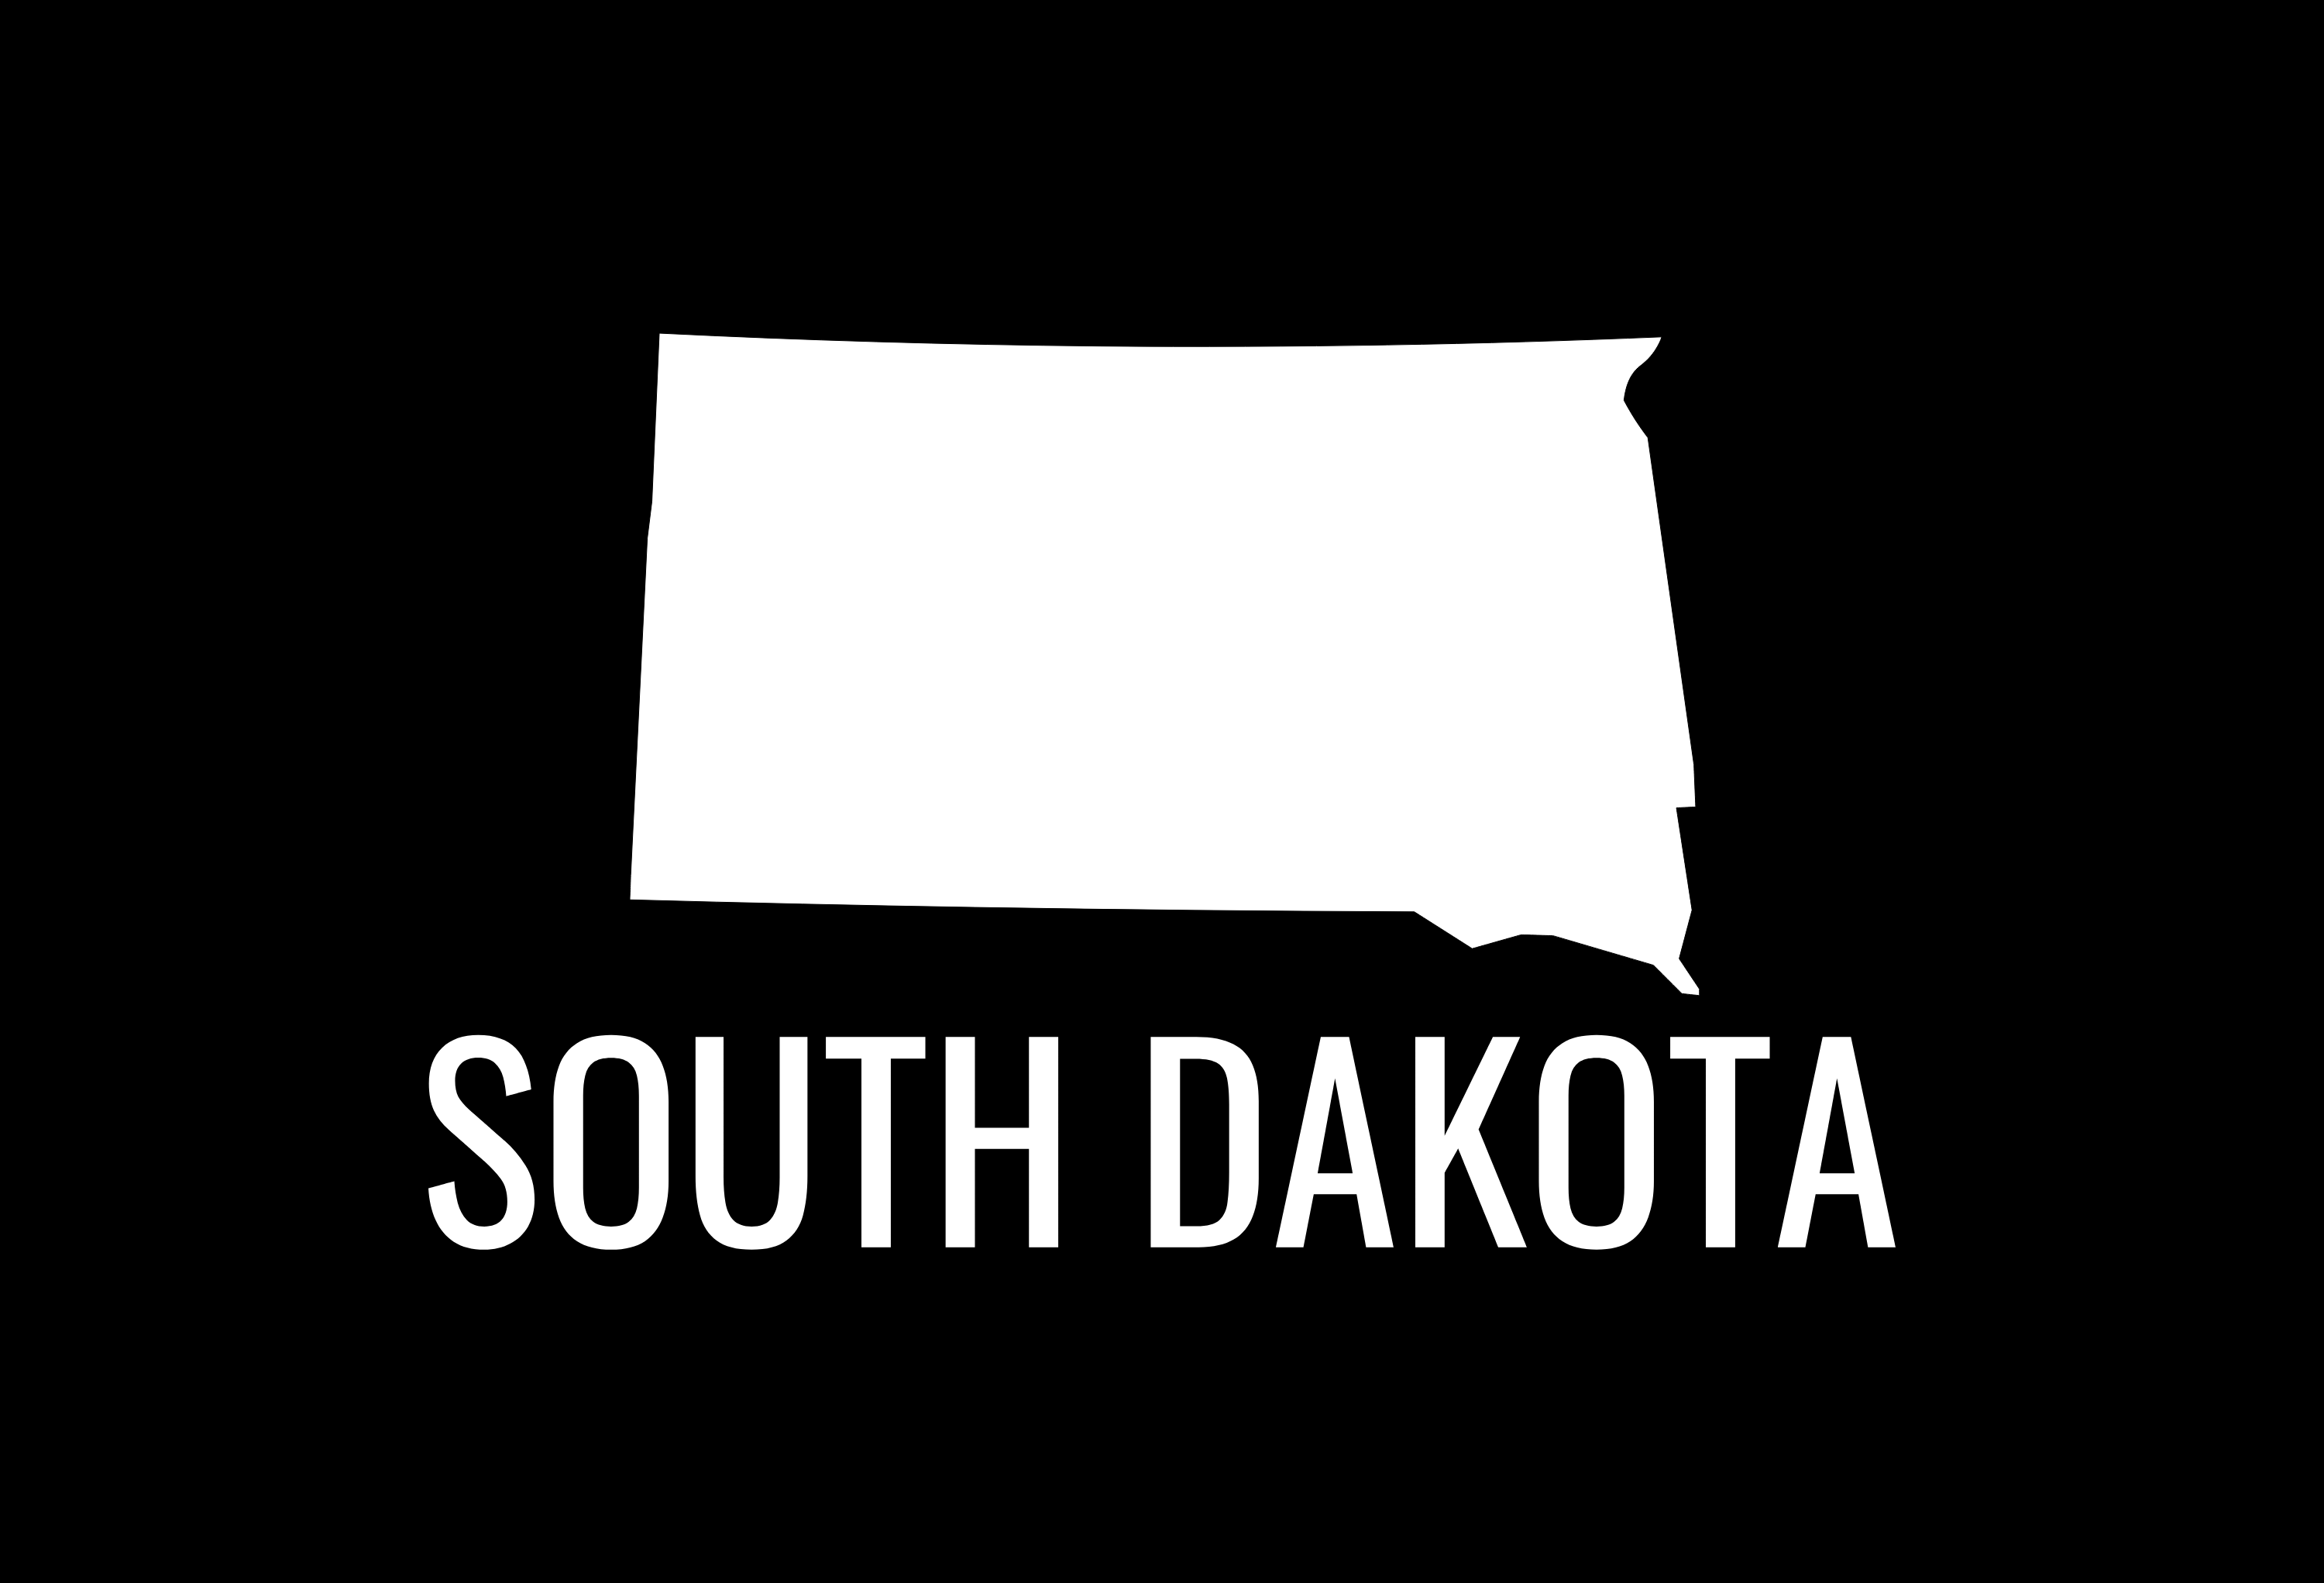 South Dakota State Map Car Decal - Permanent Vinyl Sticker for Cars, Vehicle, Doors, Windows, Laptop, and more!